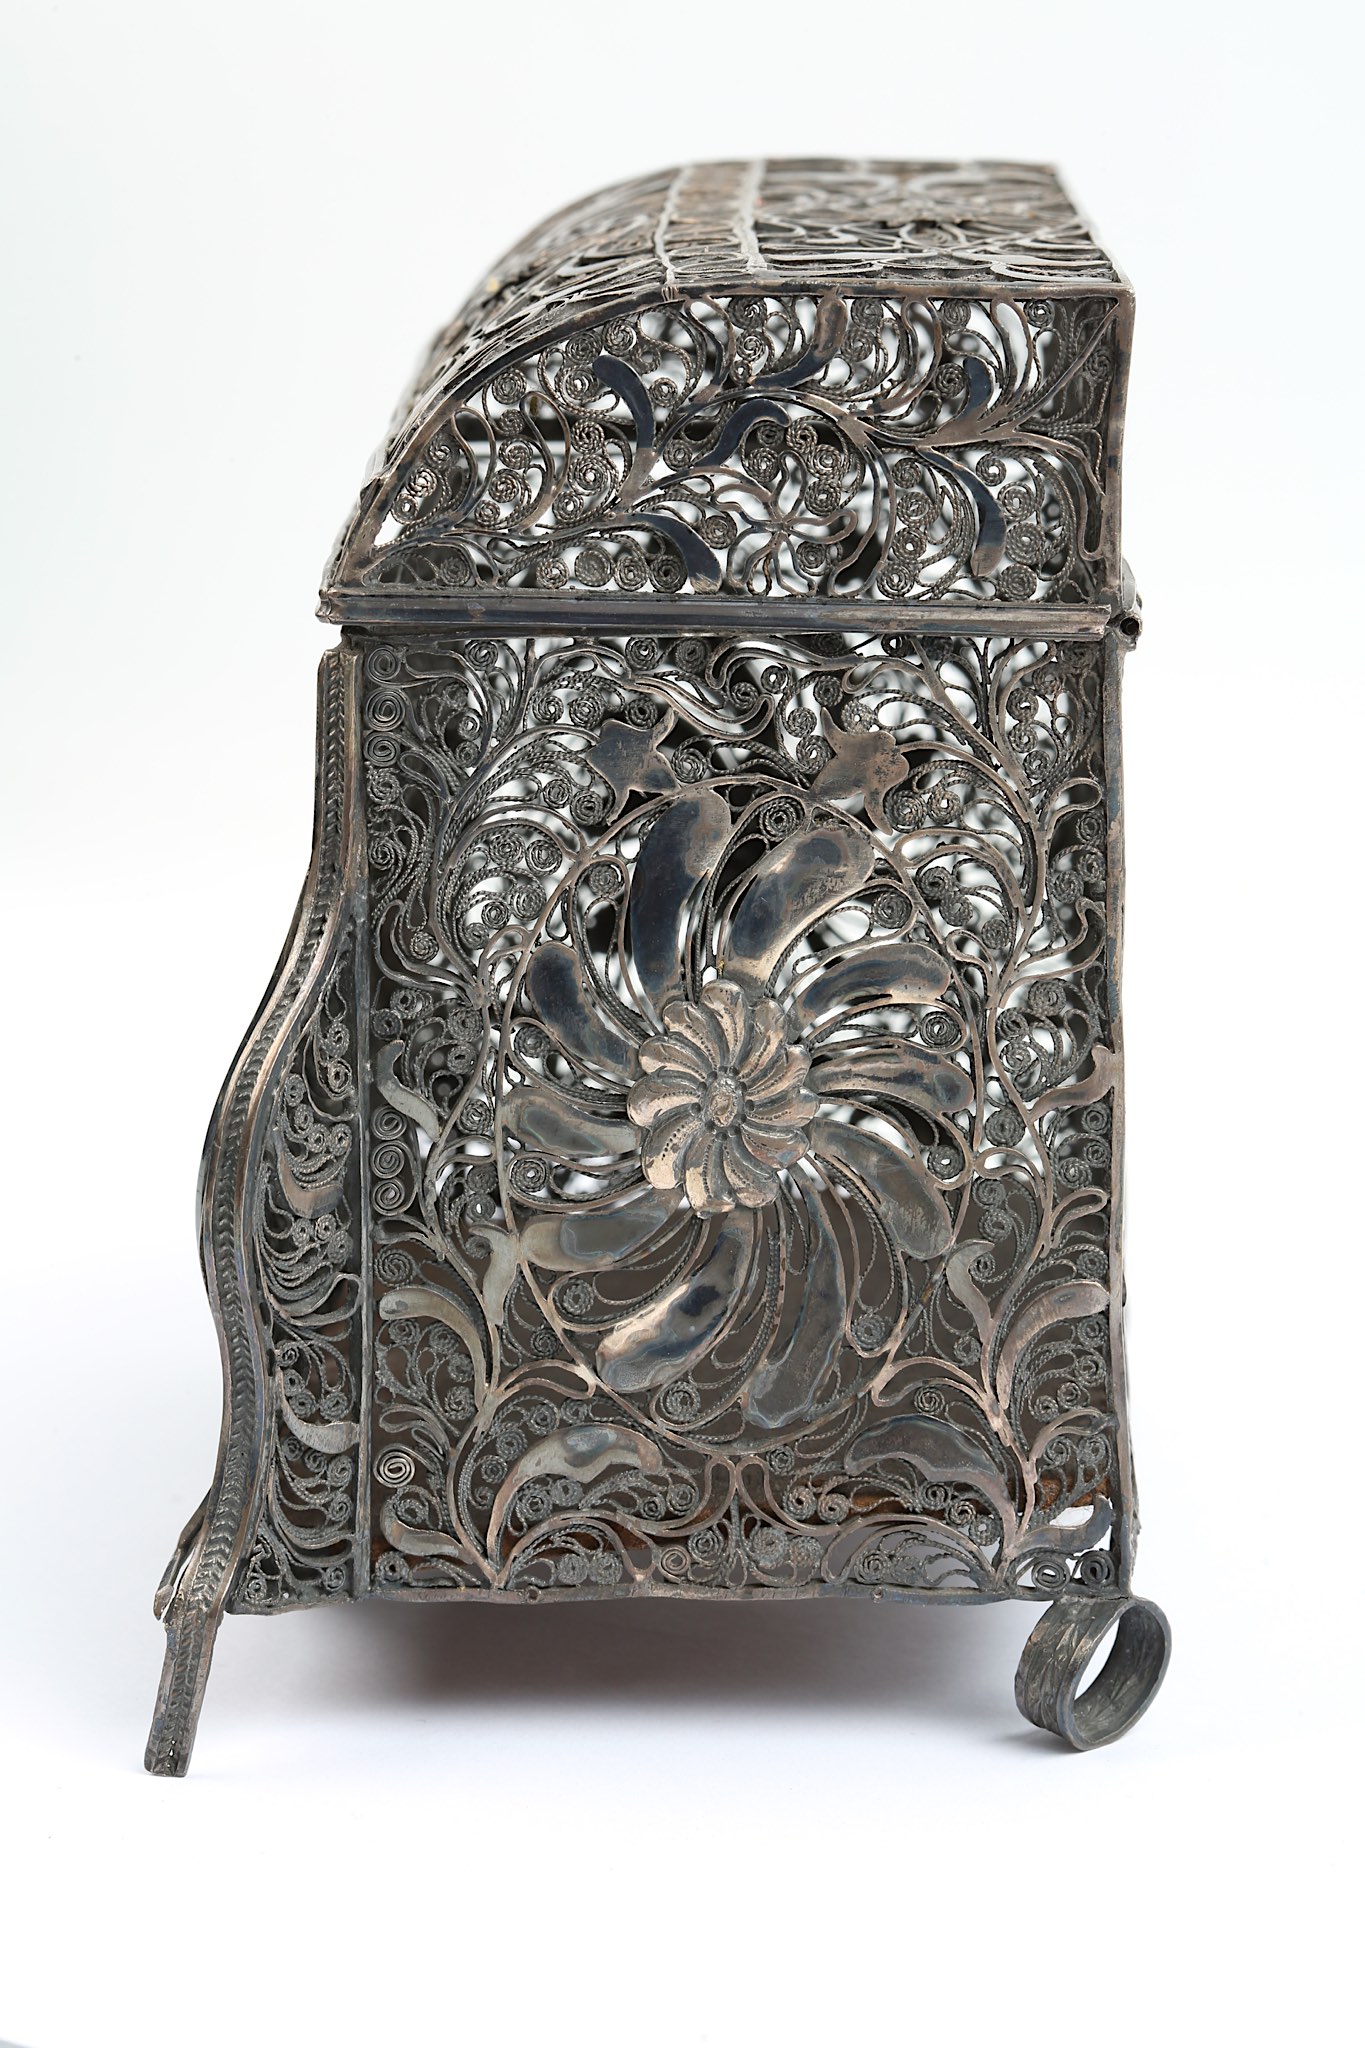 A LATE 18TH / 19TH CENTURY INDO-PORTUGUESE SILVER FILIGREE CASKET PROBABLY GOA modelled as a bombe - Image 6 of 8